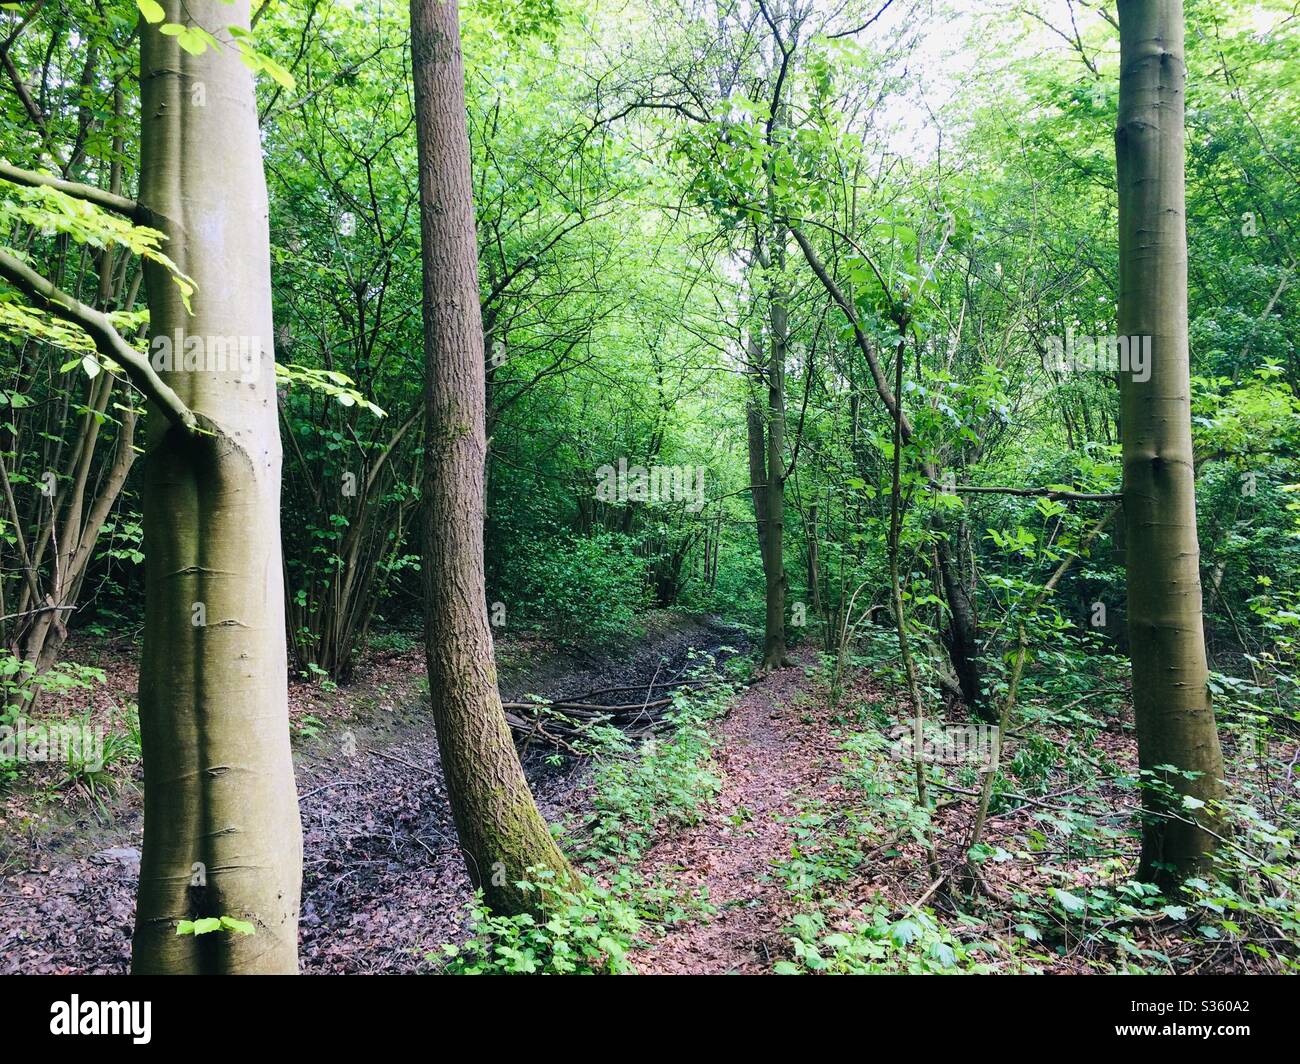 In the forest. The Netherlands. Stock Photo